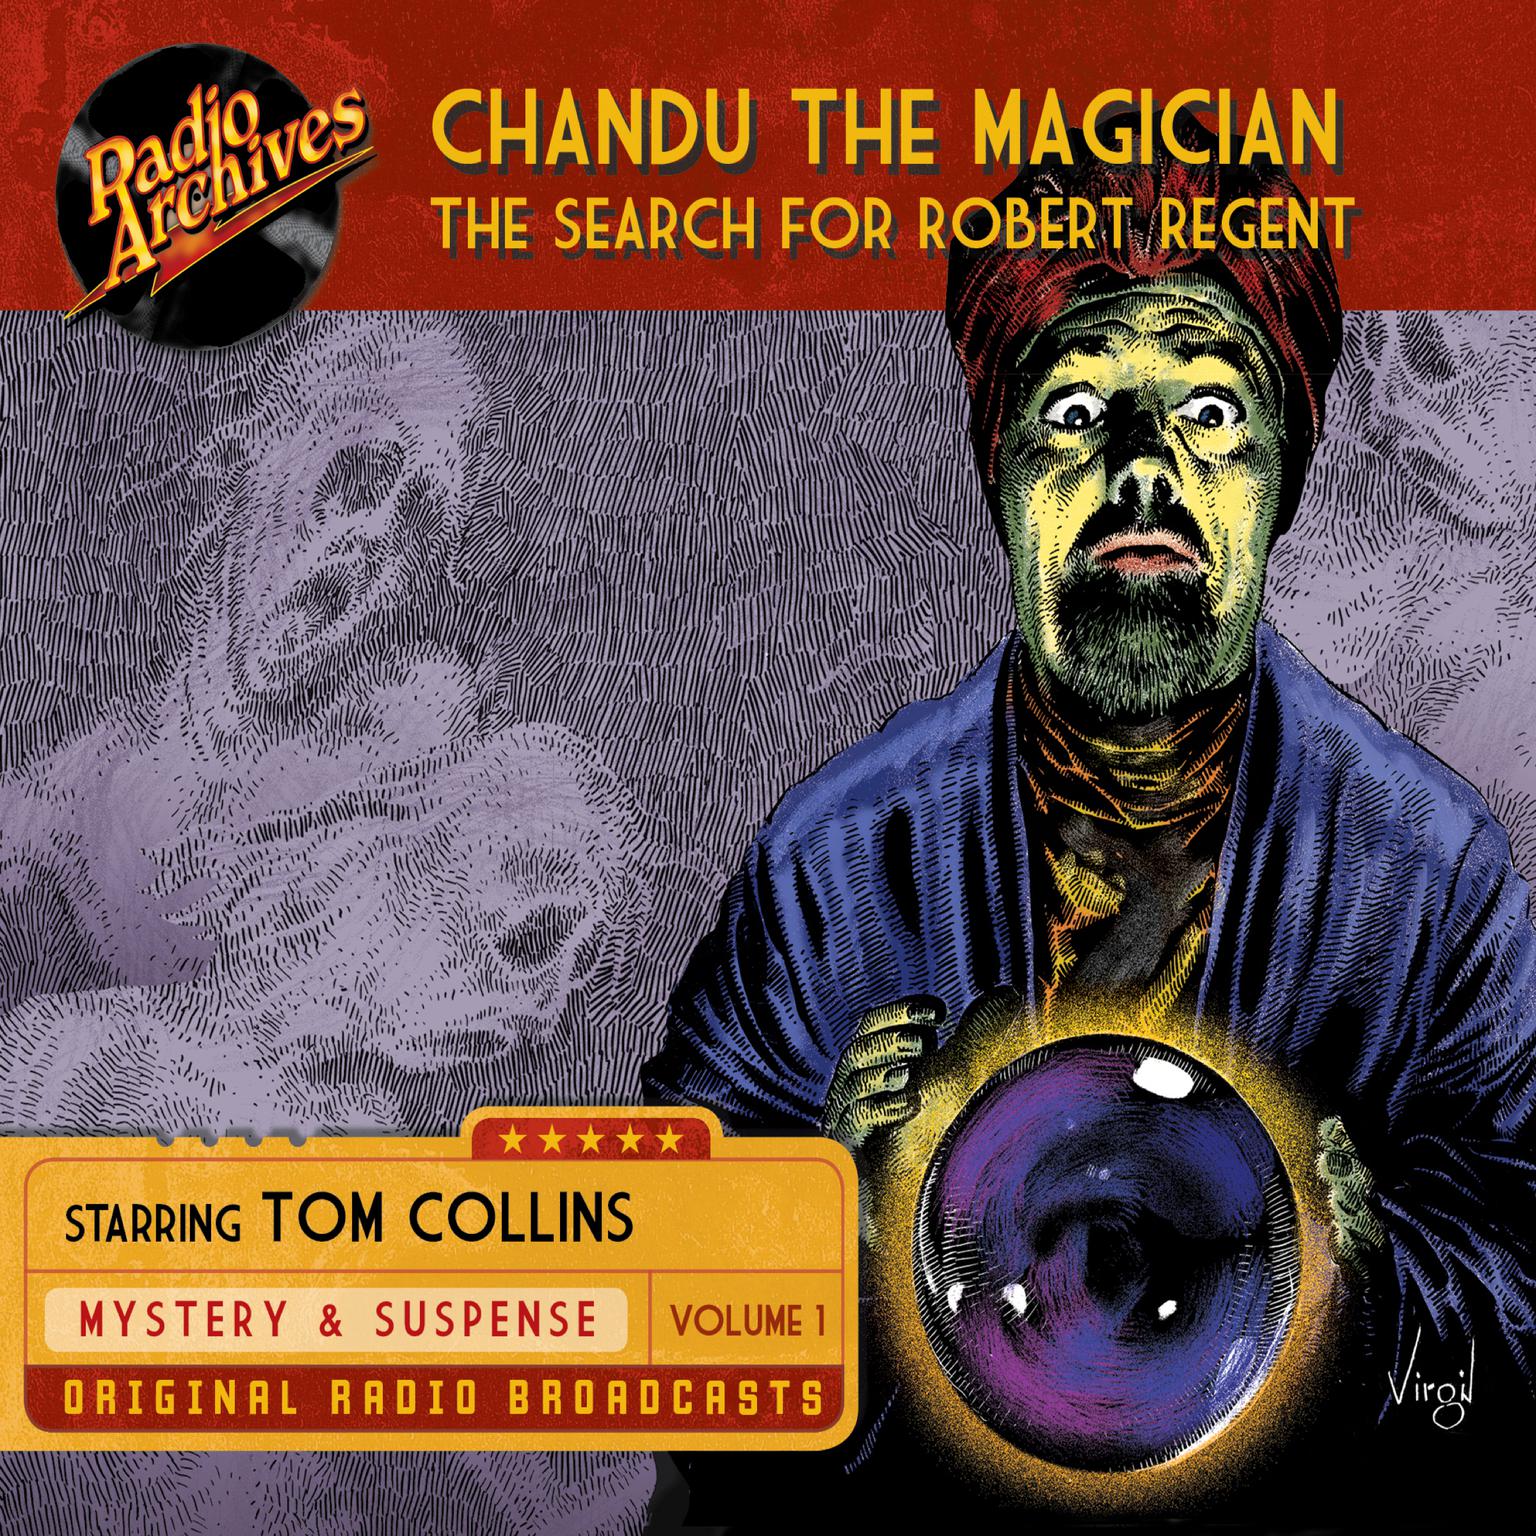 Chandu the Magician, Volume 1: The Search for Robert Regent Audiobook, by Gregory Mank